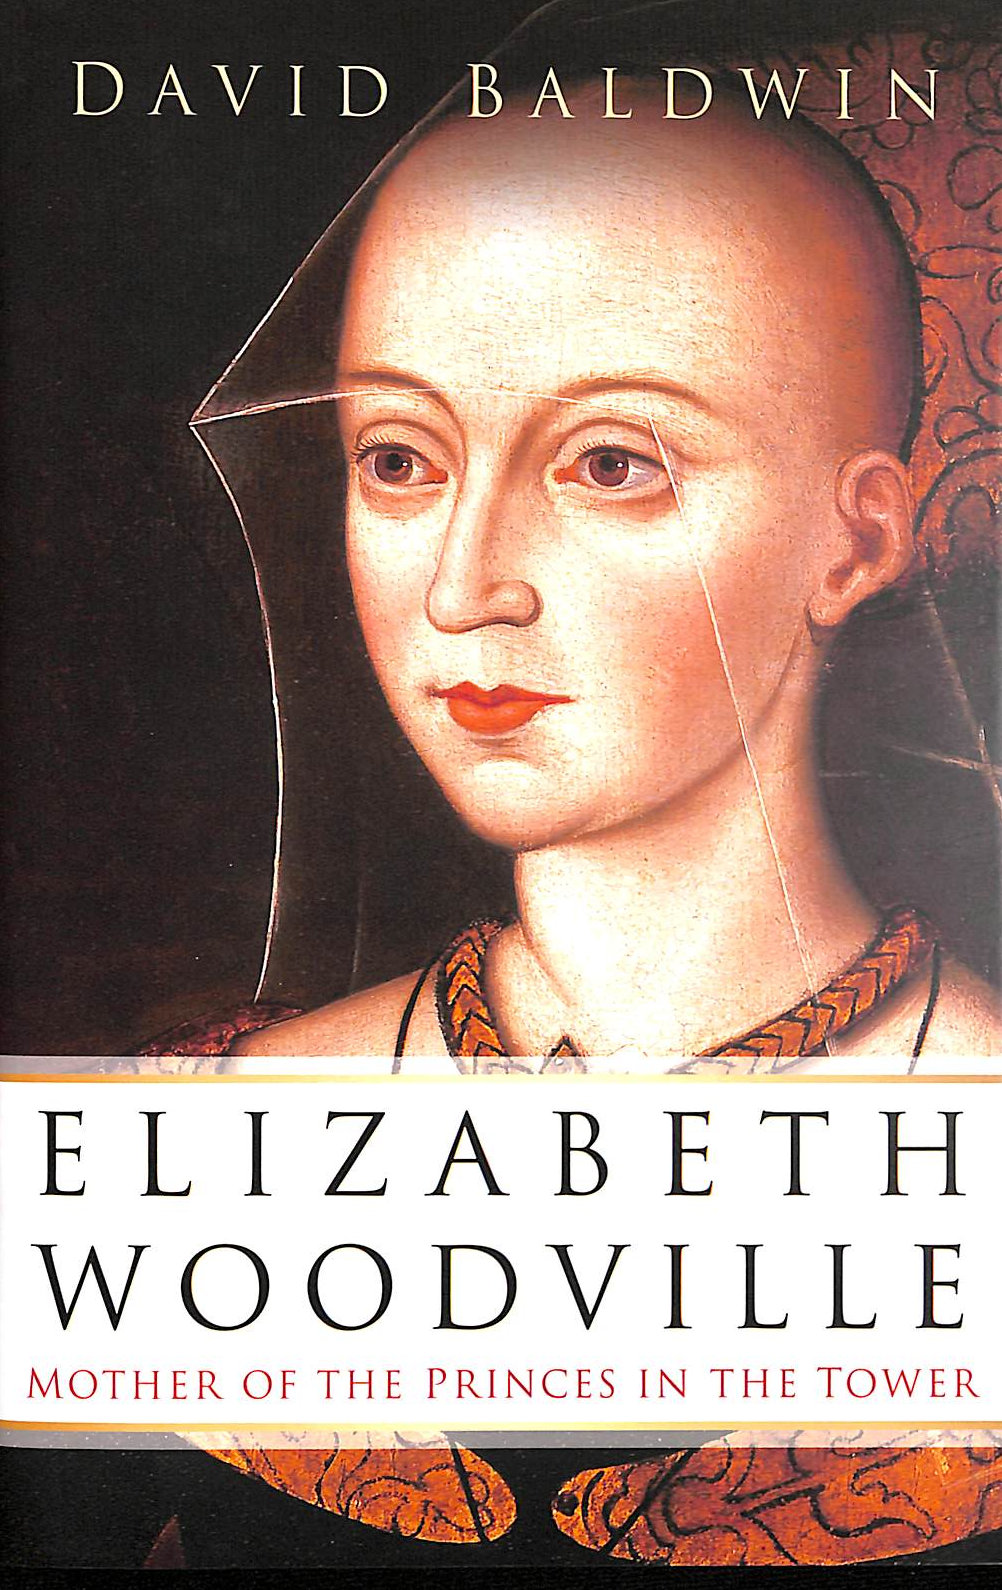 DAVID BALDWIN - Elizabeth Woodville: Mother of the Princes in the Tower